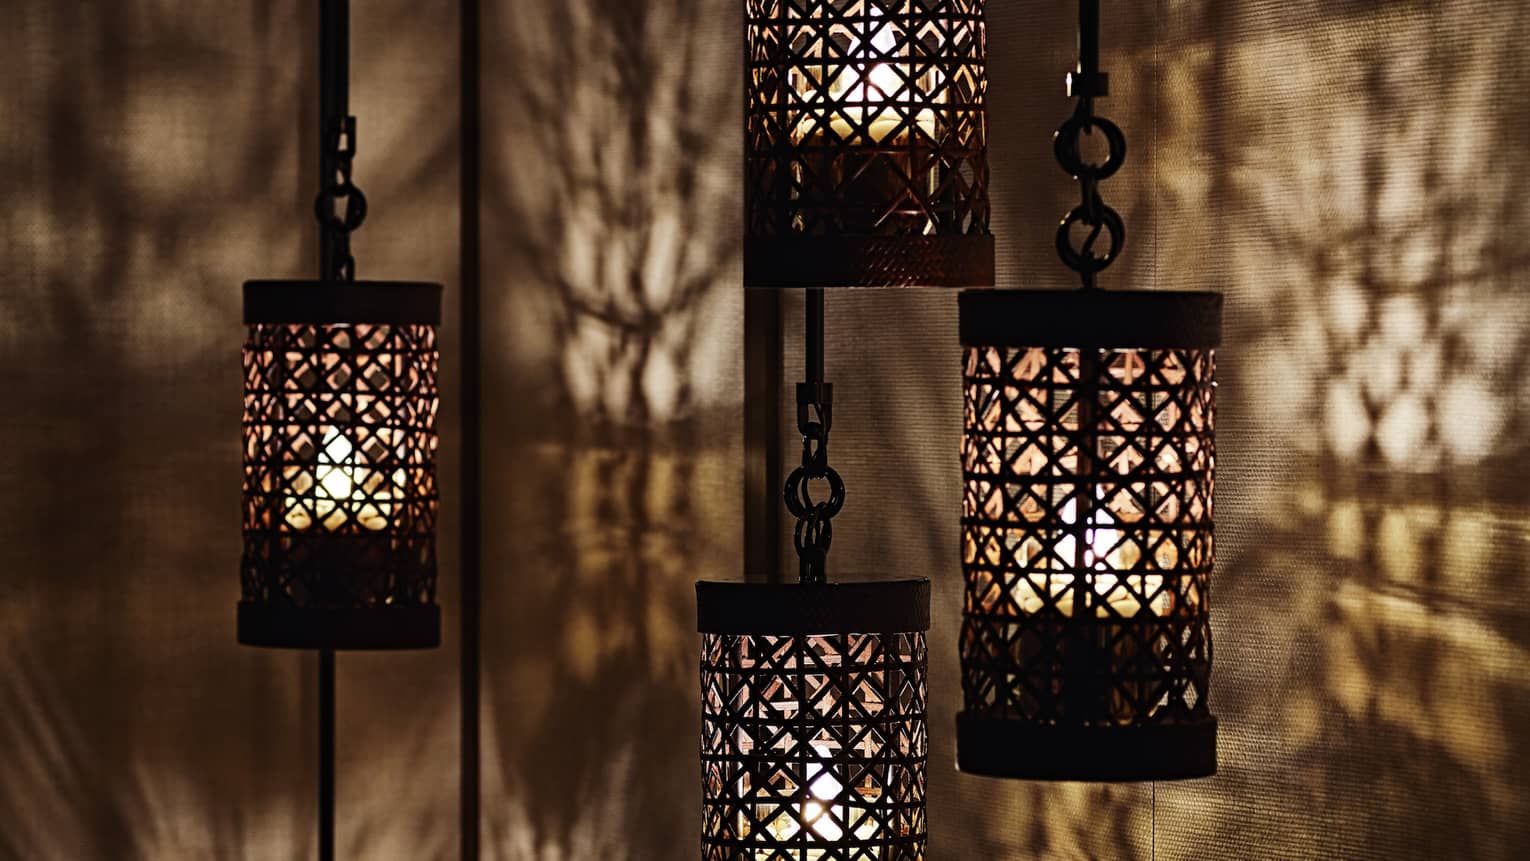 Close-up of black lanterns hanging from chains, light reflected on walls